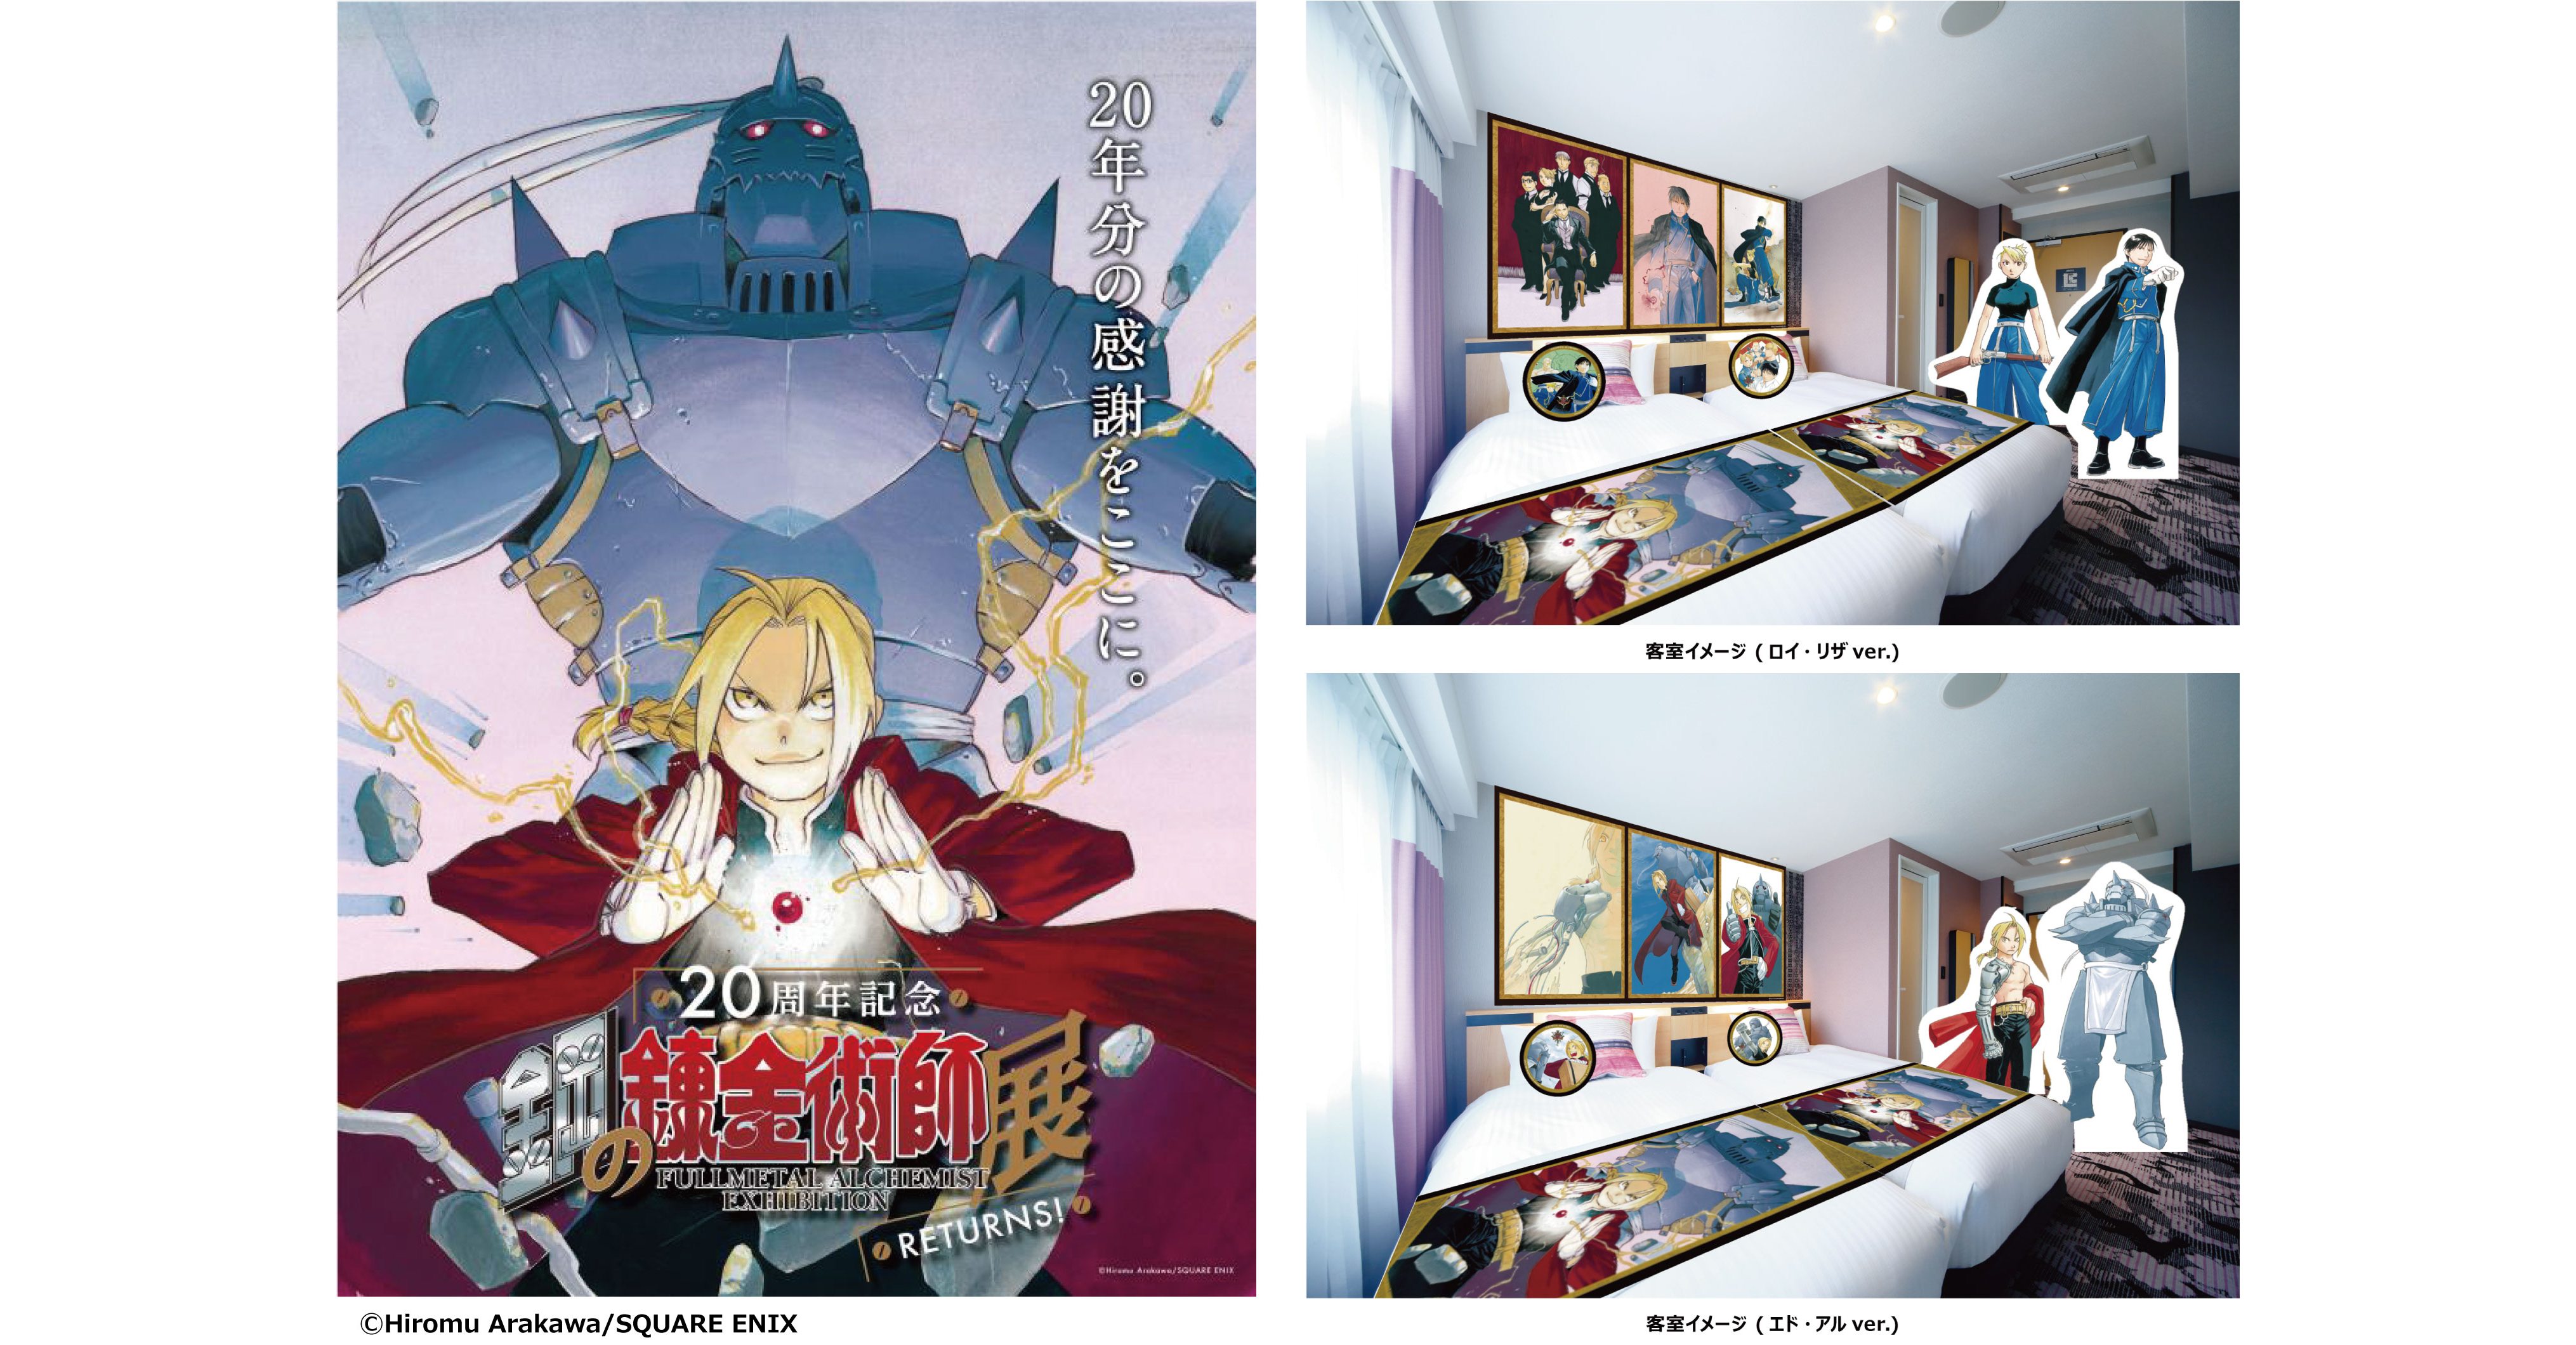 Fullmetal Alchemist' to mark 20th anniversary with special program on July  12